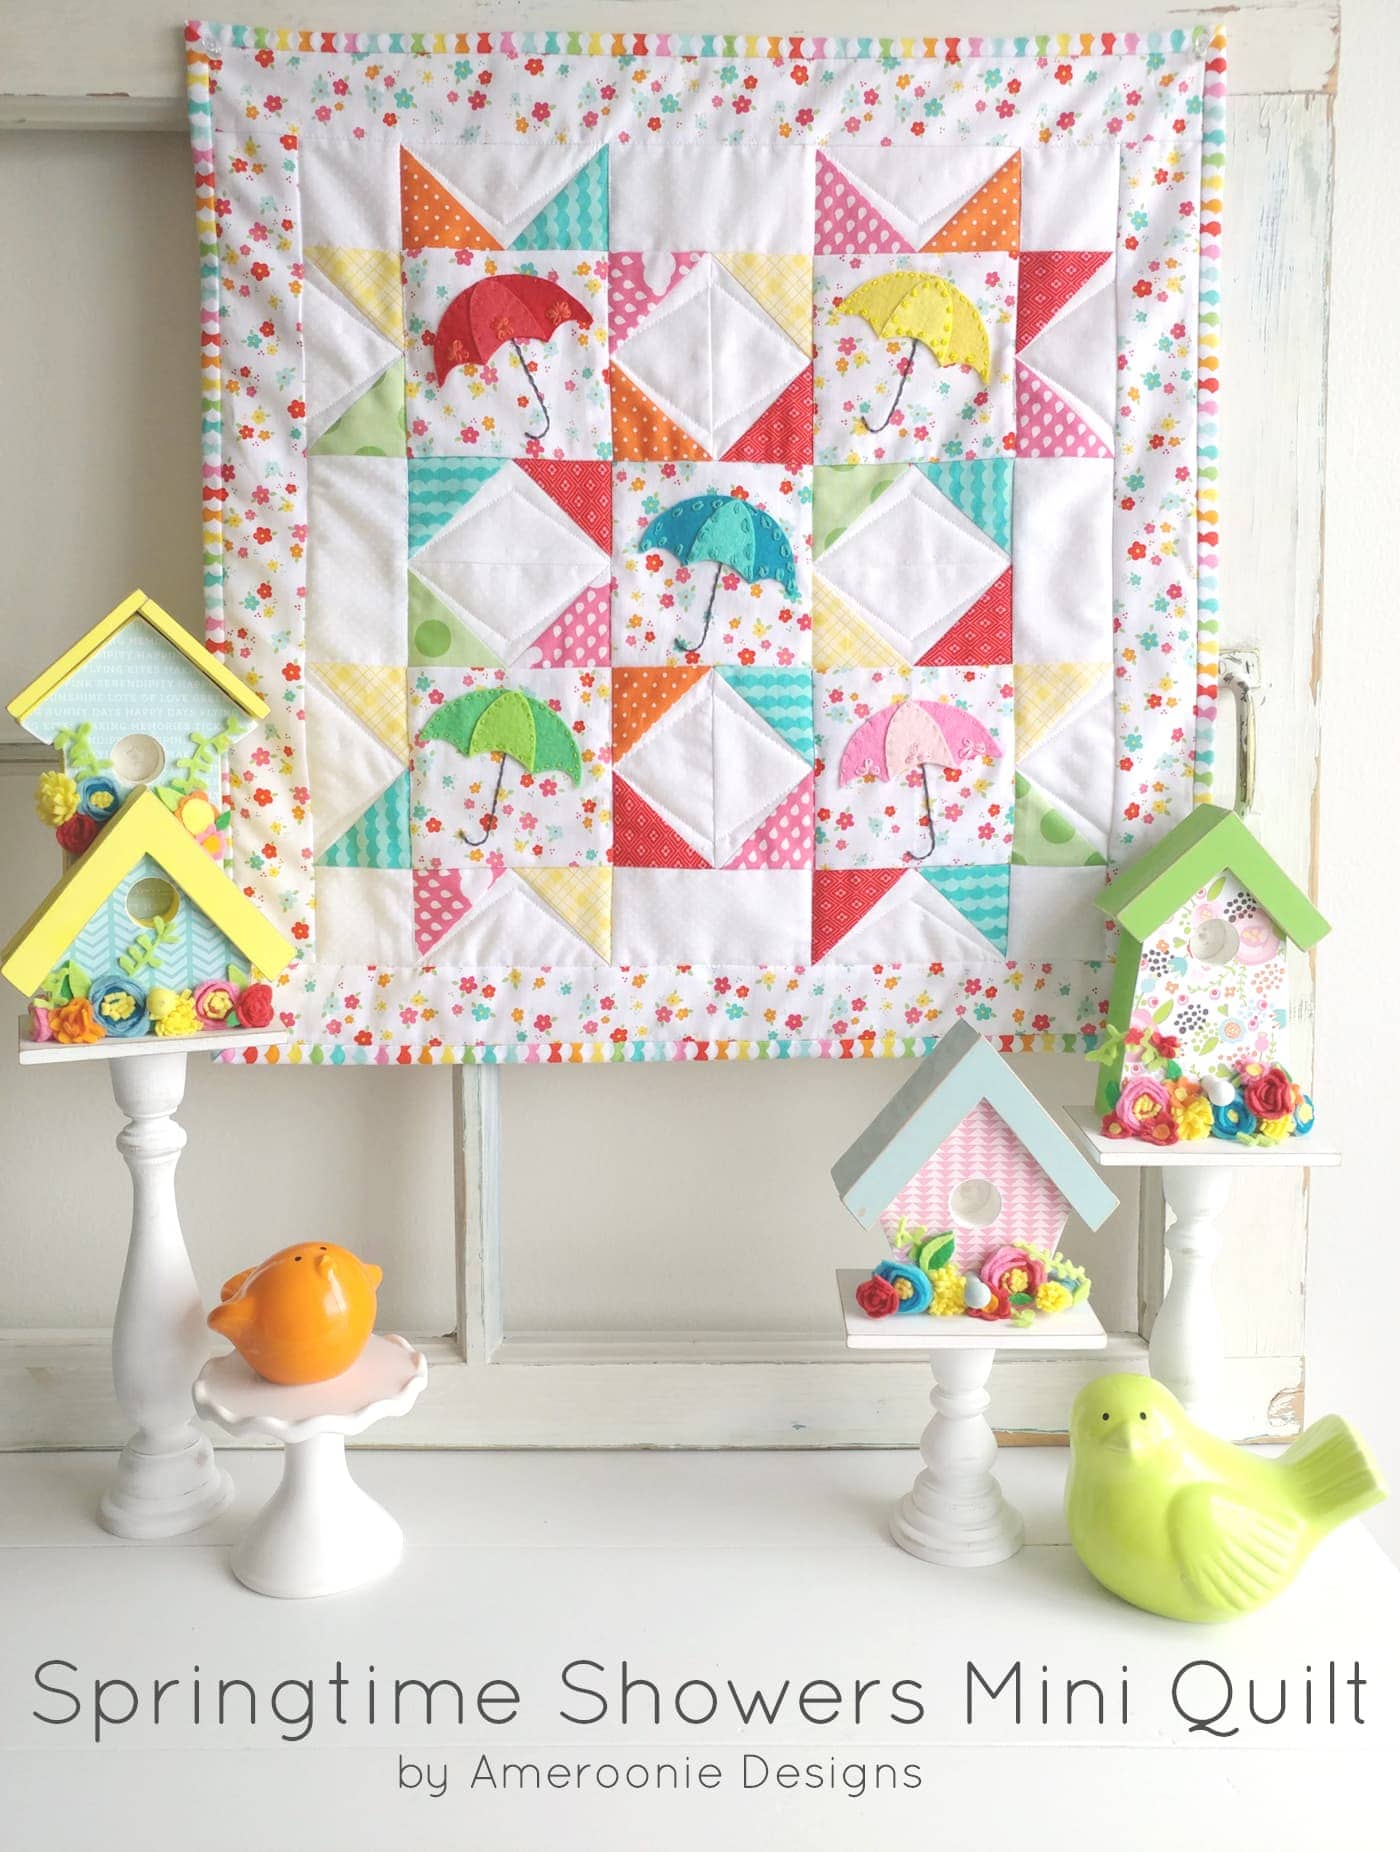 "Springtime Showers" is a Free Mini Quilt Pattern designed by Melissa Mortenson from the Polkadot Chair!